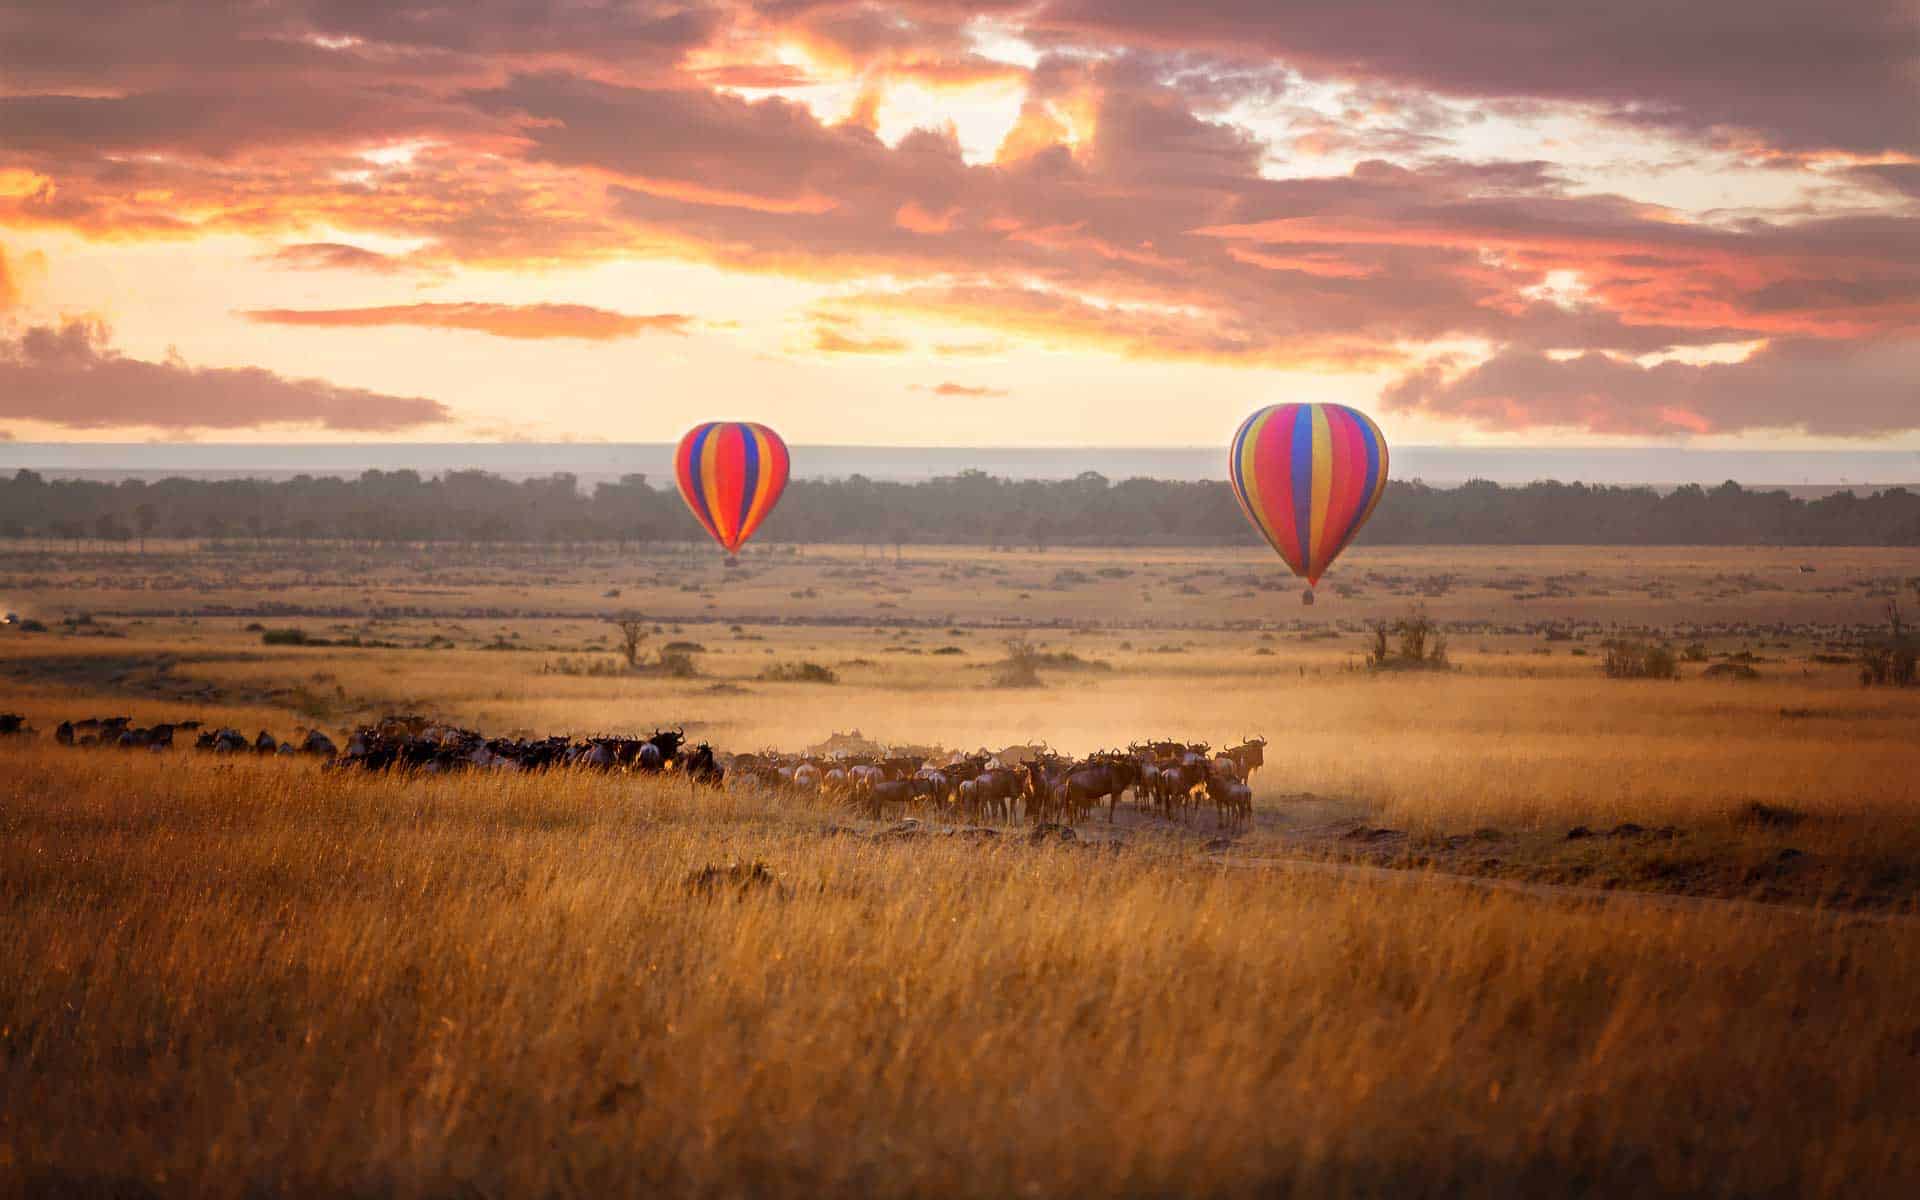 Two hot air balloons hovering over a herd of wildebeest forming part of the Great Wildebeest Migrations - one of the Seven Natural Wonders of Africa.